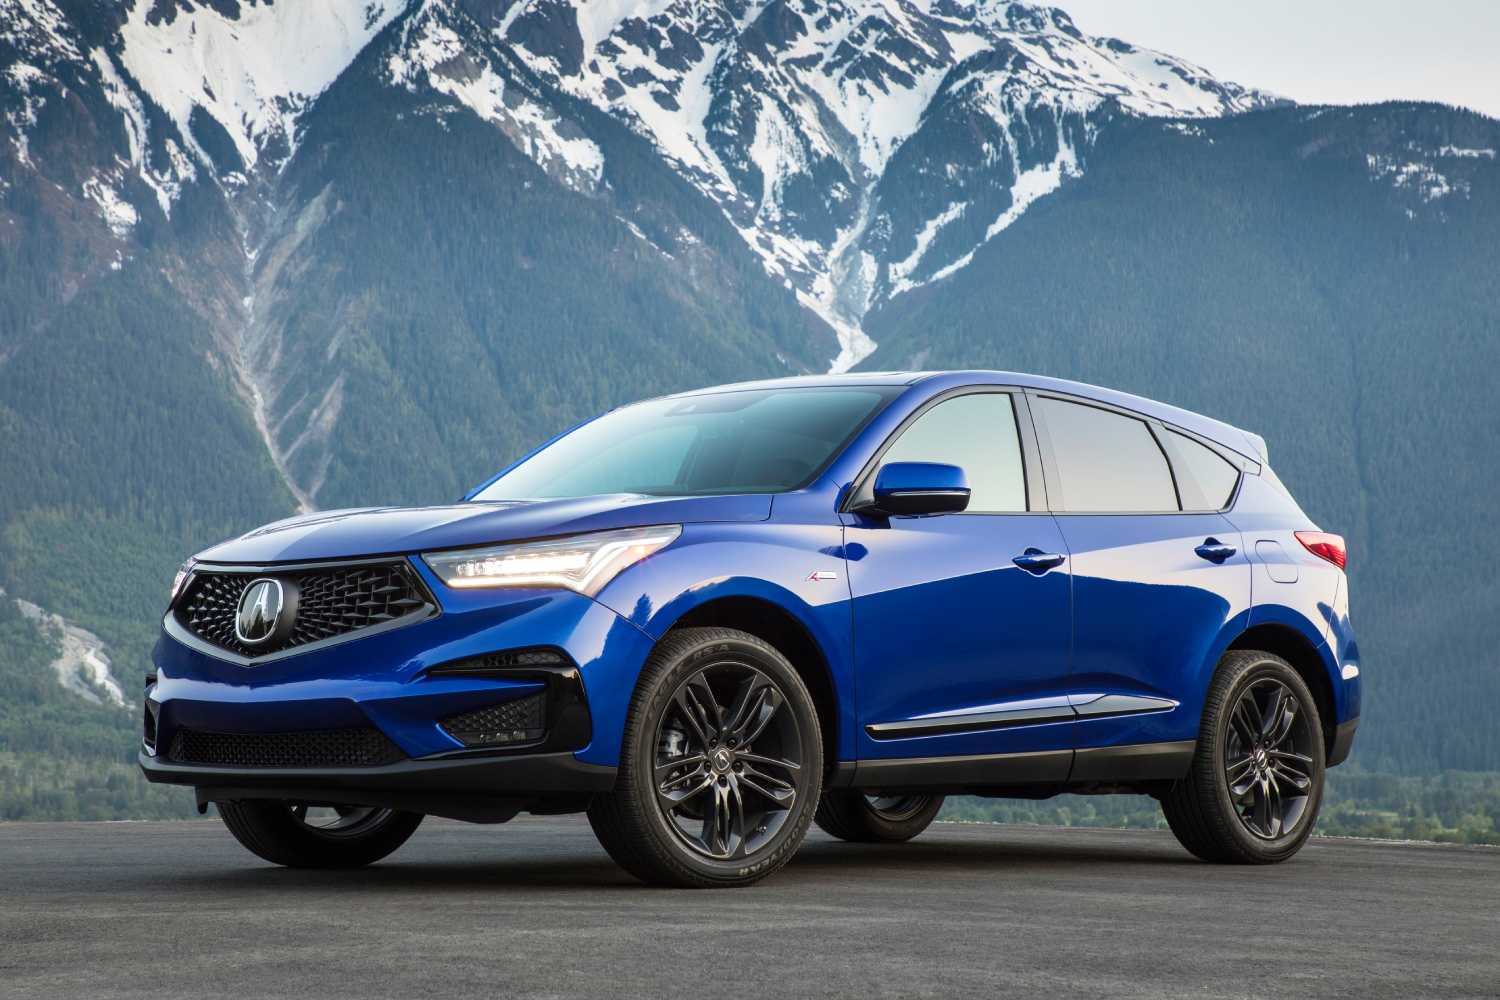 These reliable and popular luxury SUVs like the Acura RDX